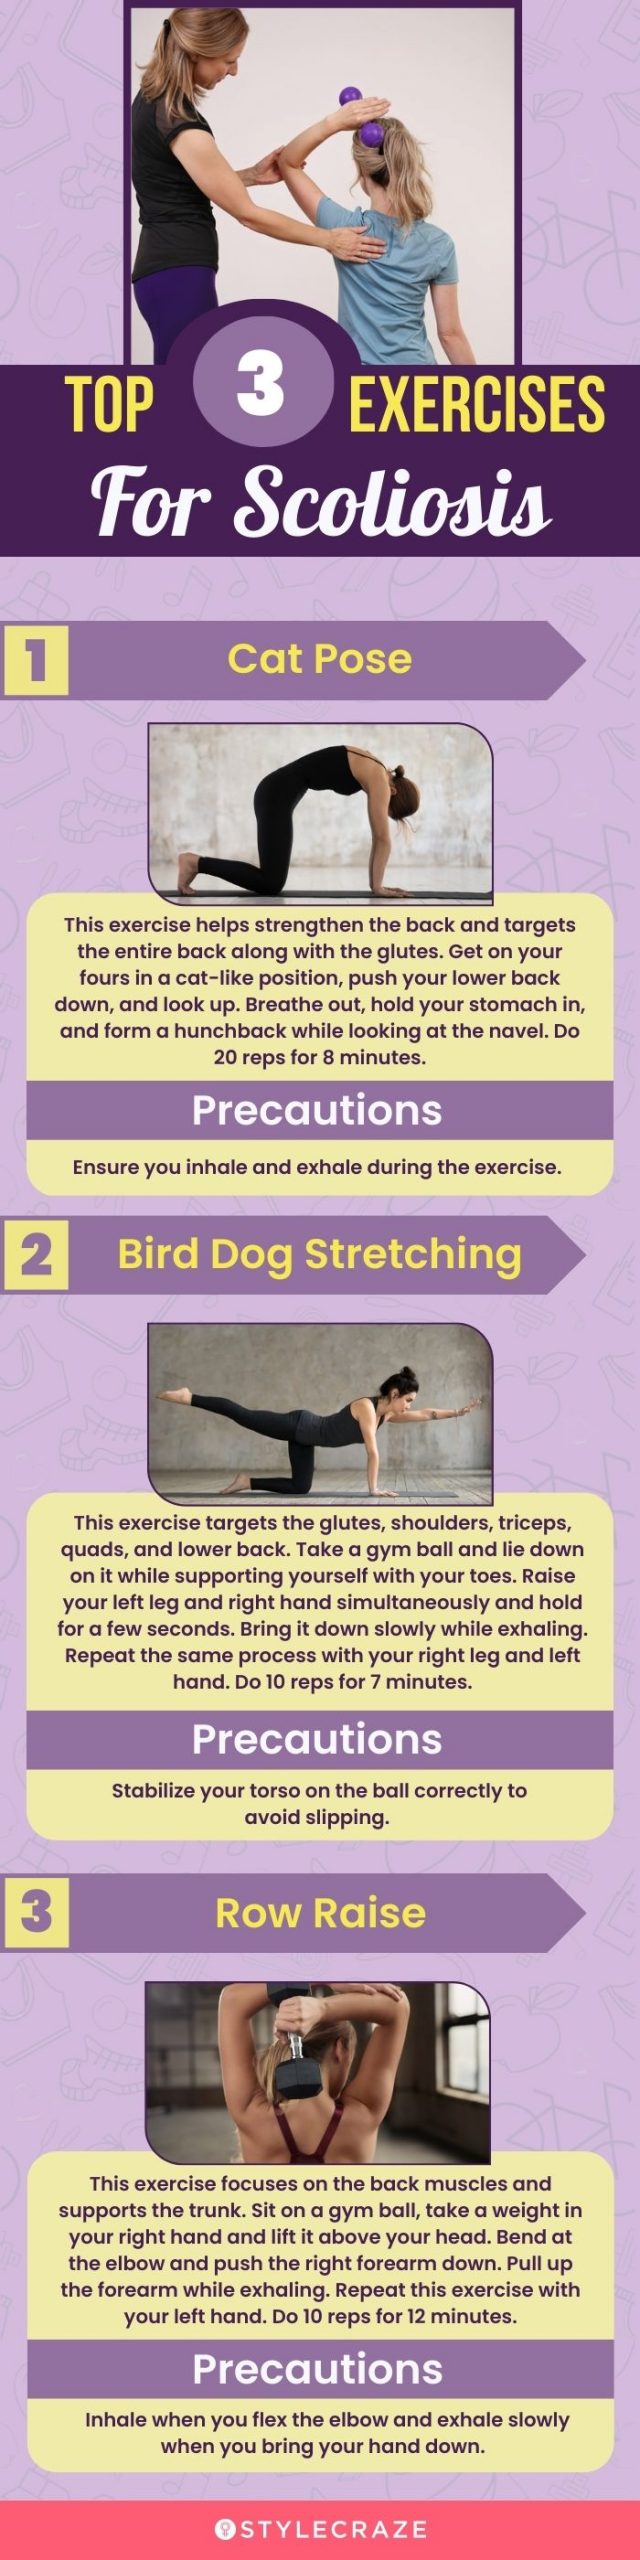 top 3 exercises for scoliosis (infographic)